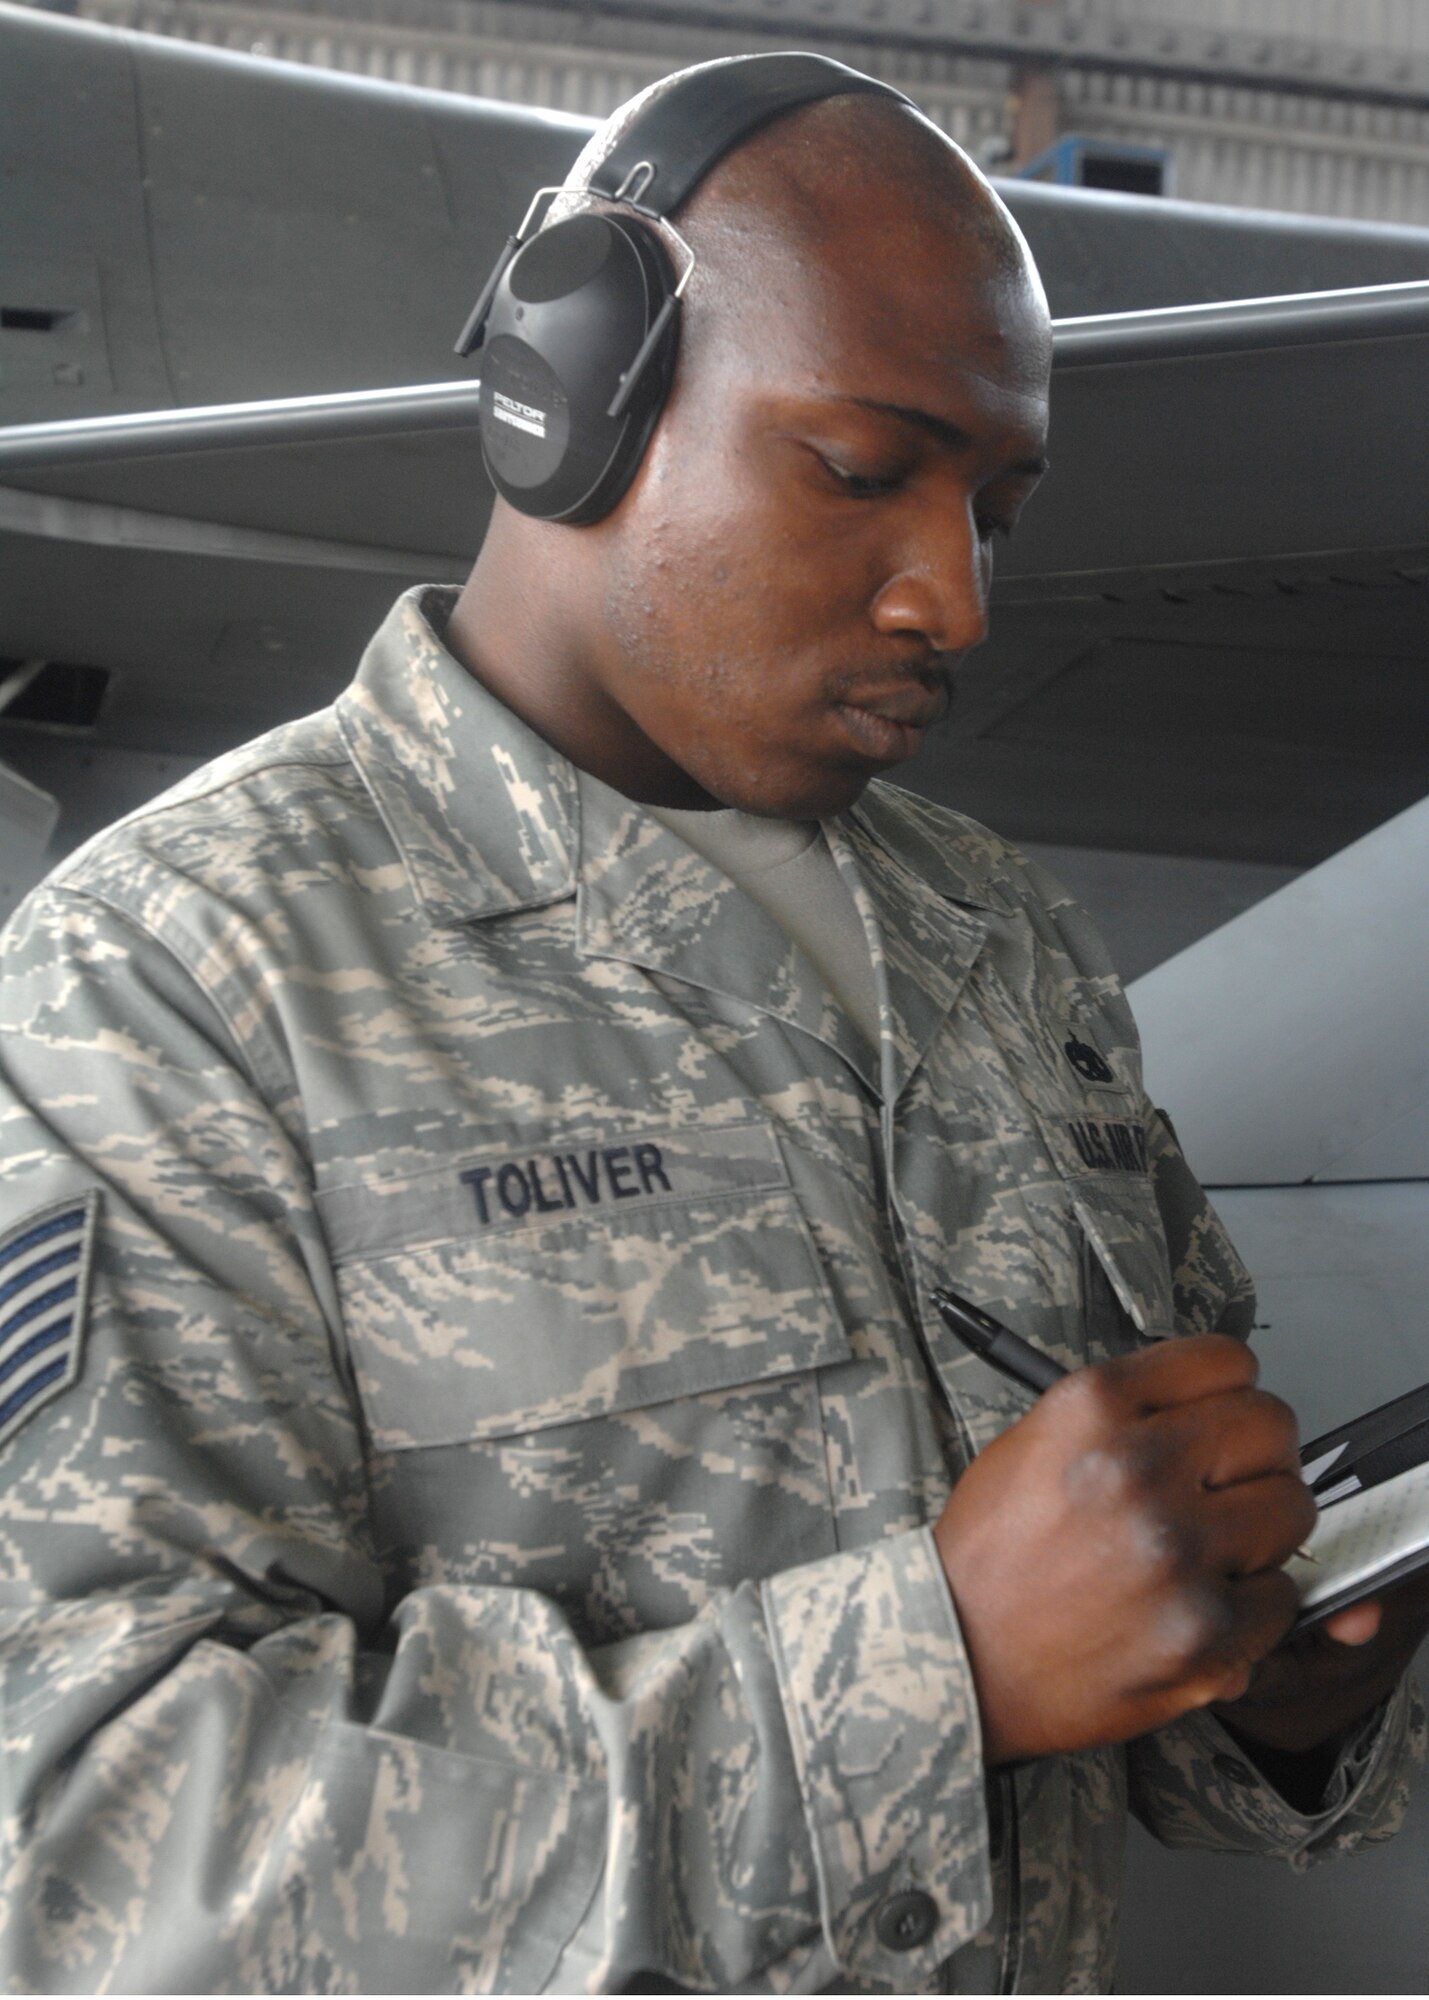 SPANGDAHLEM AIR BASE, Germany -- Tech. Sgt. Anthony Toliver, 52nd Aircraft Maintenance Squadron, takes notes while inspecting members of the 23rd Fighter Squadron during the load crew Ccompetition July 17. Members from the 23rd and 81st Fighter Squadrons put together three-man teams and competed against each other in loading weapons onto the F-16 Fighting Falcon and A-10 Thunderbolt II in the fastest time. (U.S. Air Force photo by Senior Airman Jenifer H. Calhoun)